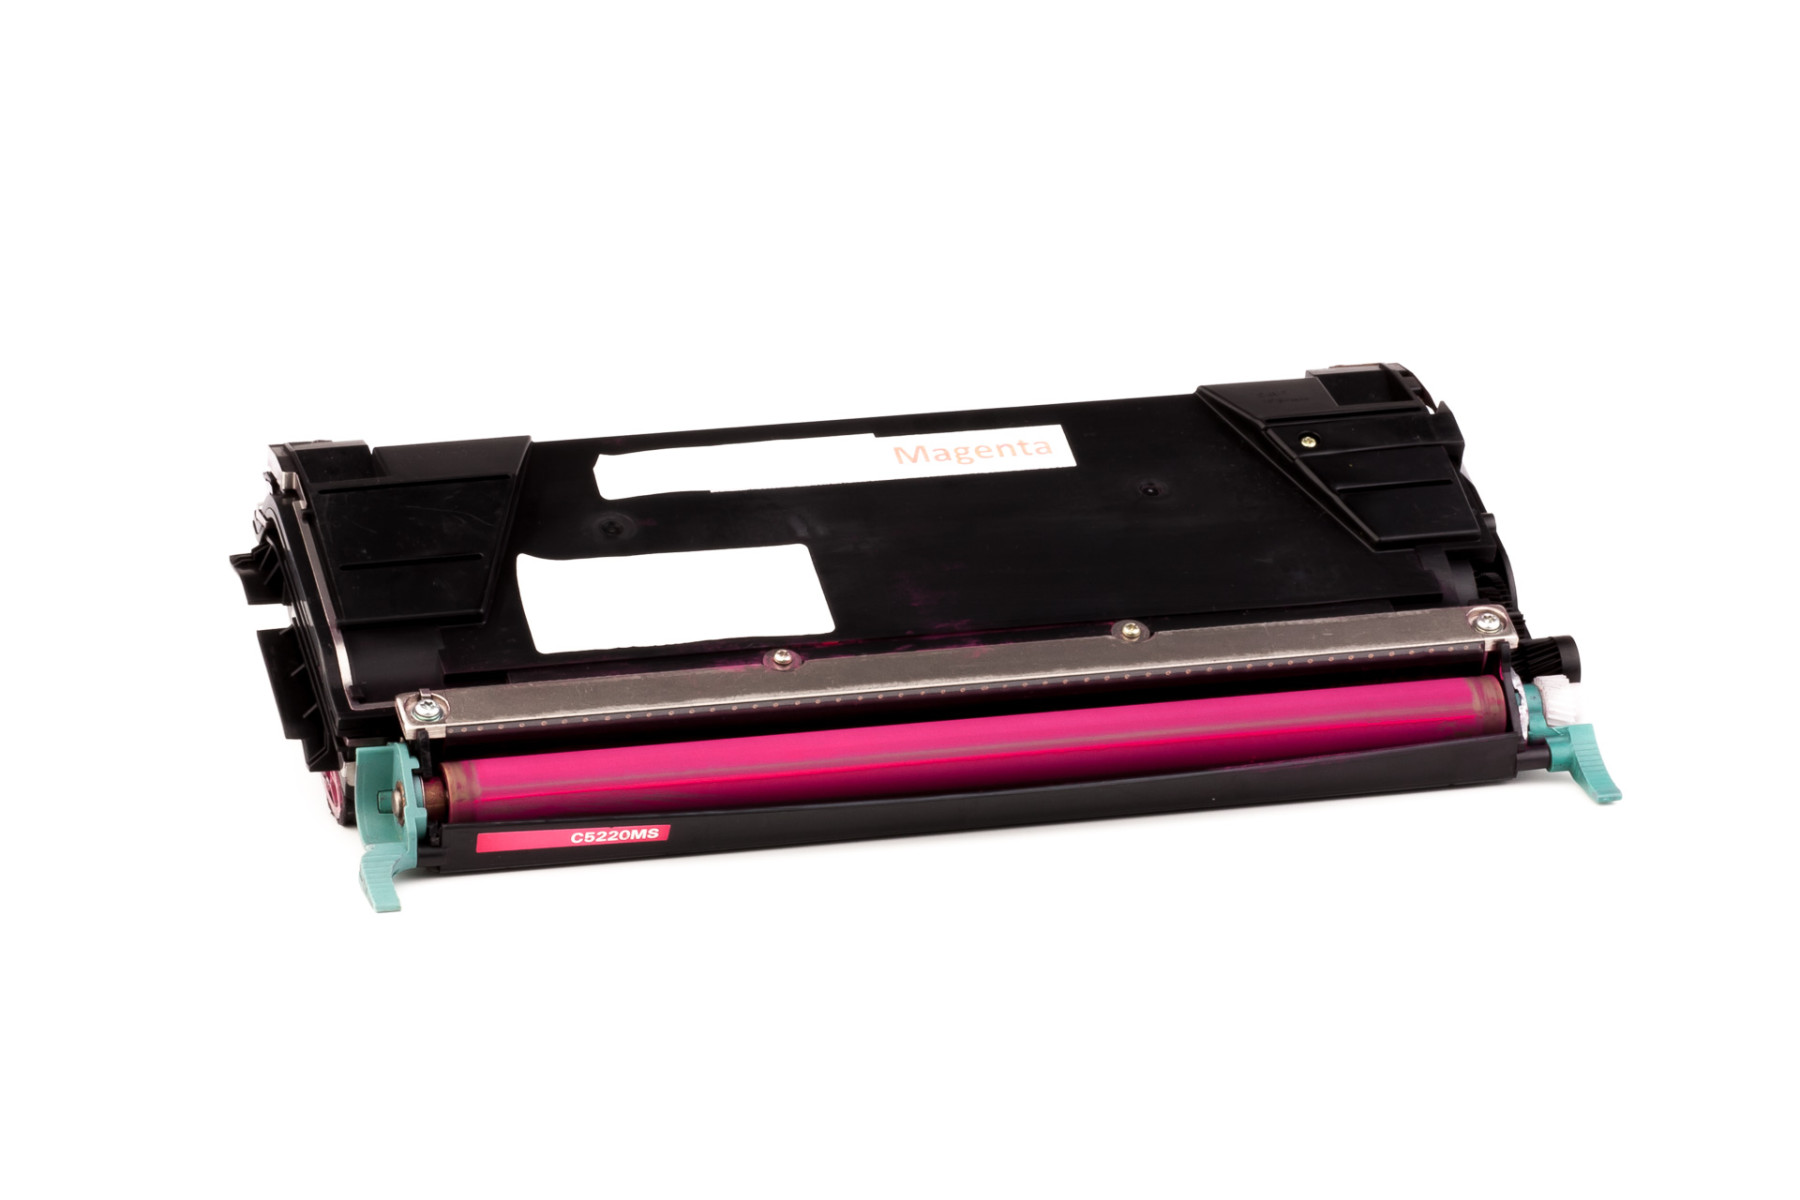 Set consisting of Toner cartridge (alternative) compatible with Lexmark Color C524  N DN DTN C534 N DN DTN black, cyan, magenta, yellow - Save 6%